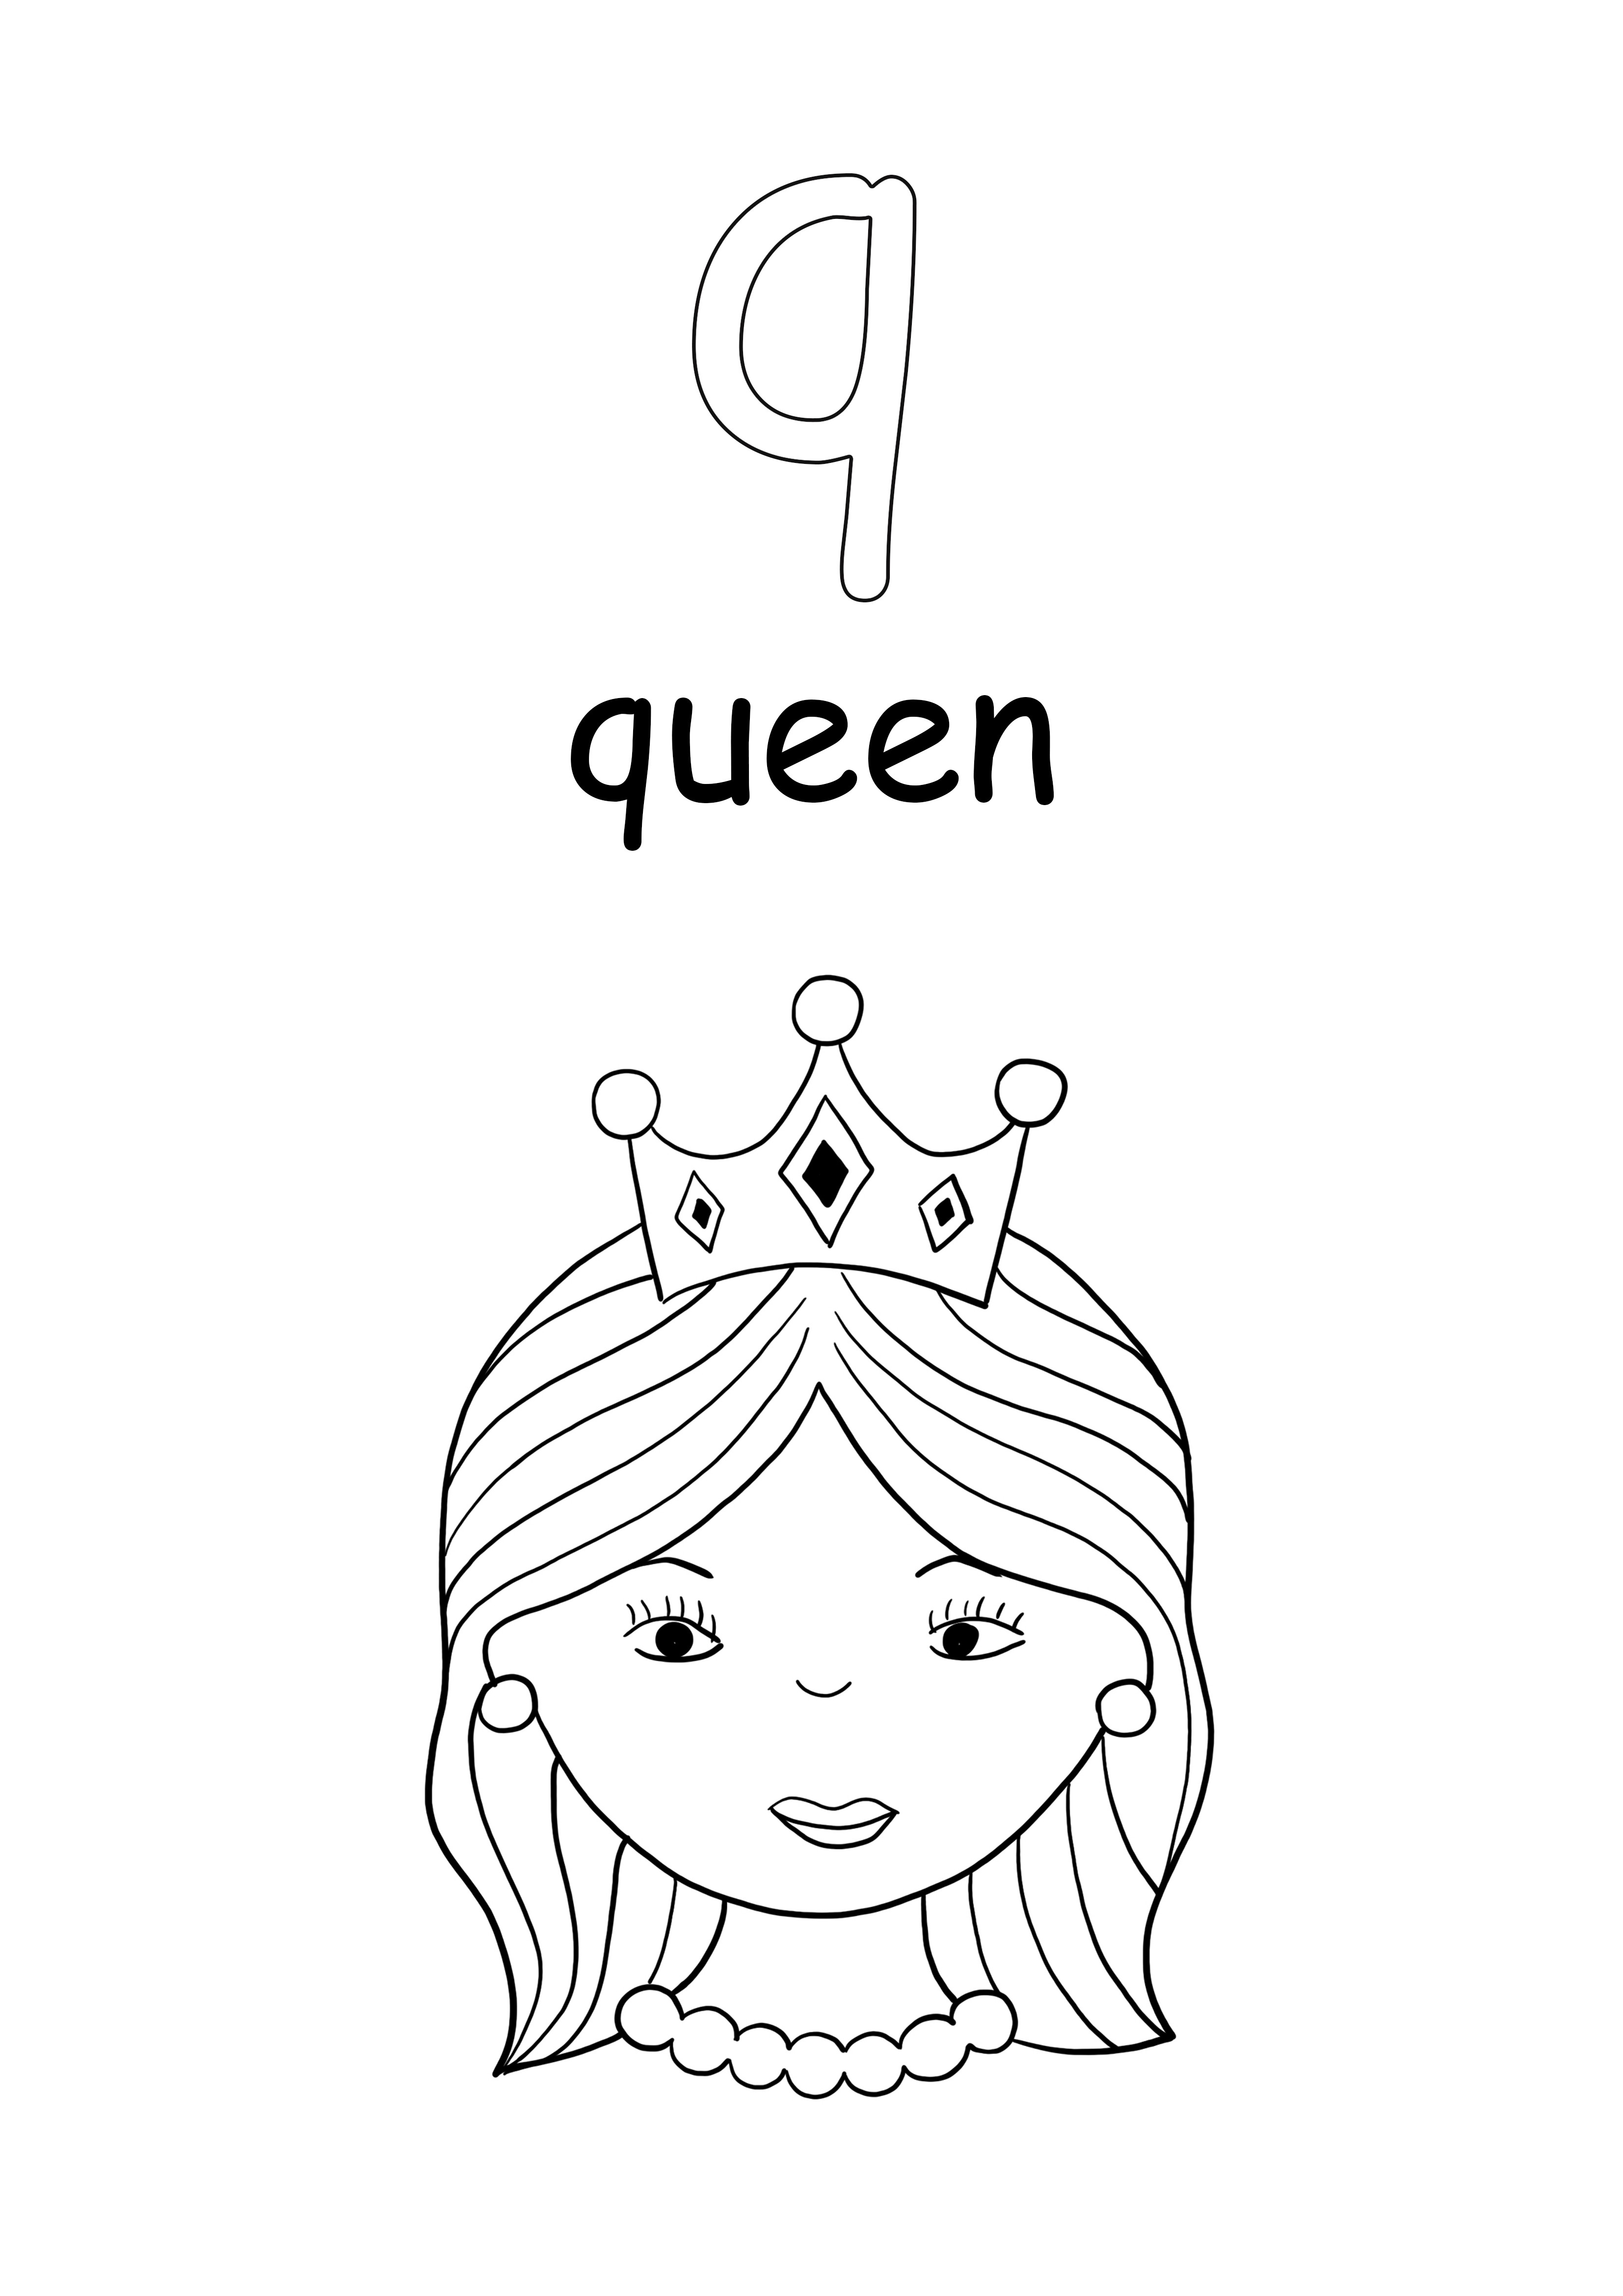 Lowercase word queen and letter q coloring and download for free